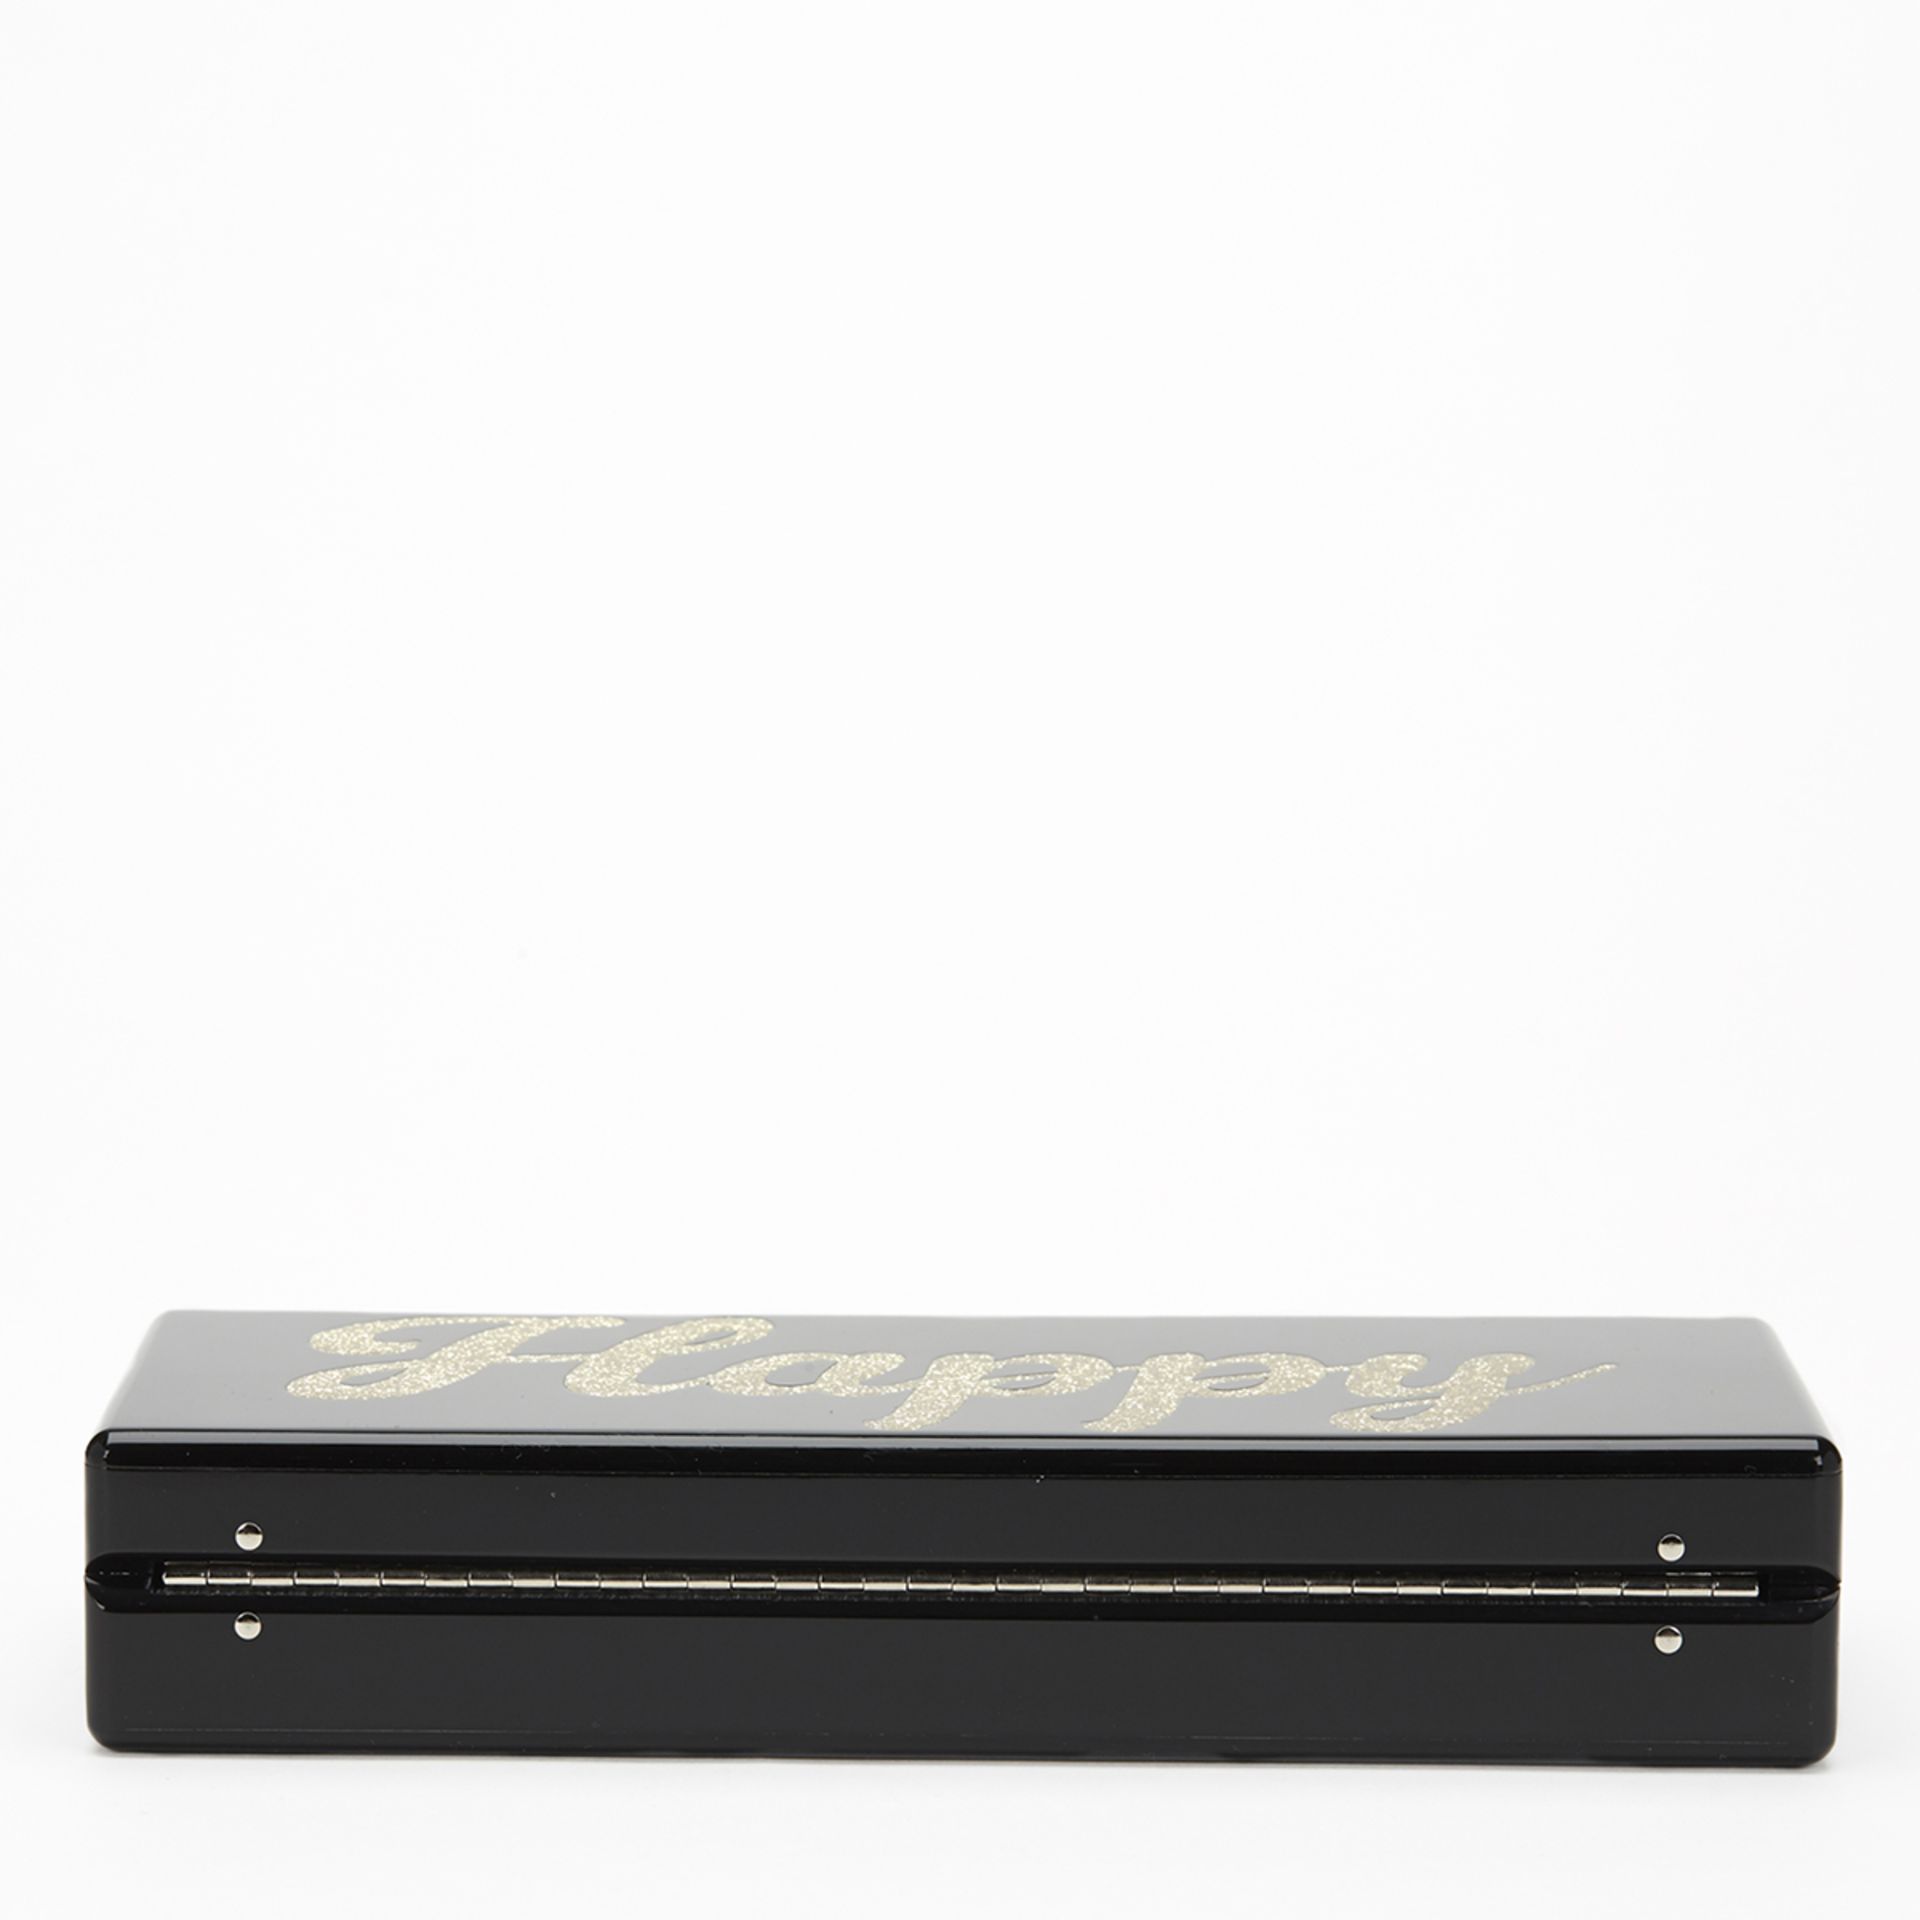 EDIE PARKER Flavia , - Black Glittered Acrylic Happy Box Clutch   TYPE Clutch SERIAL NUMBER _ YEAR - Image 5 of 9